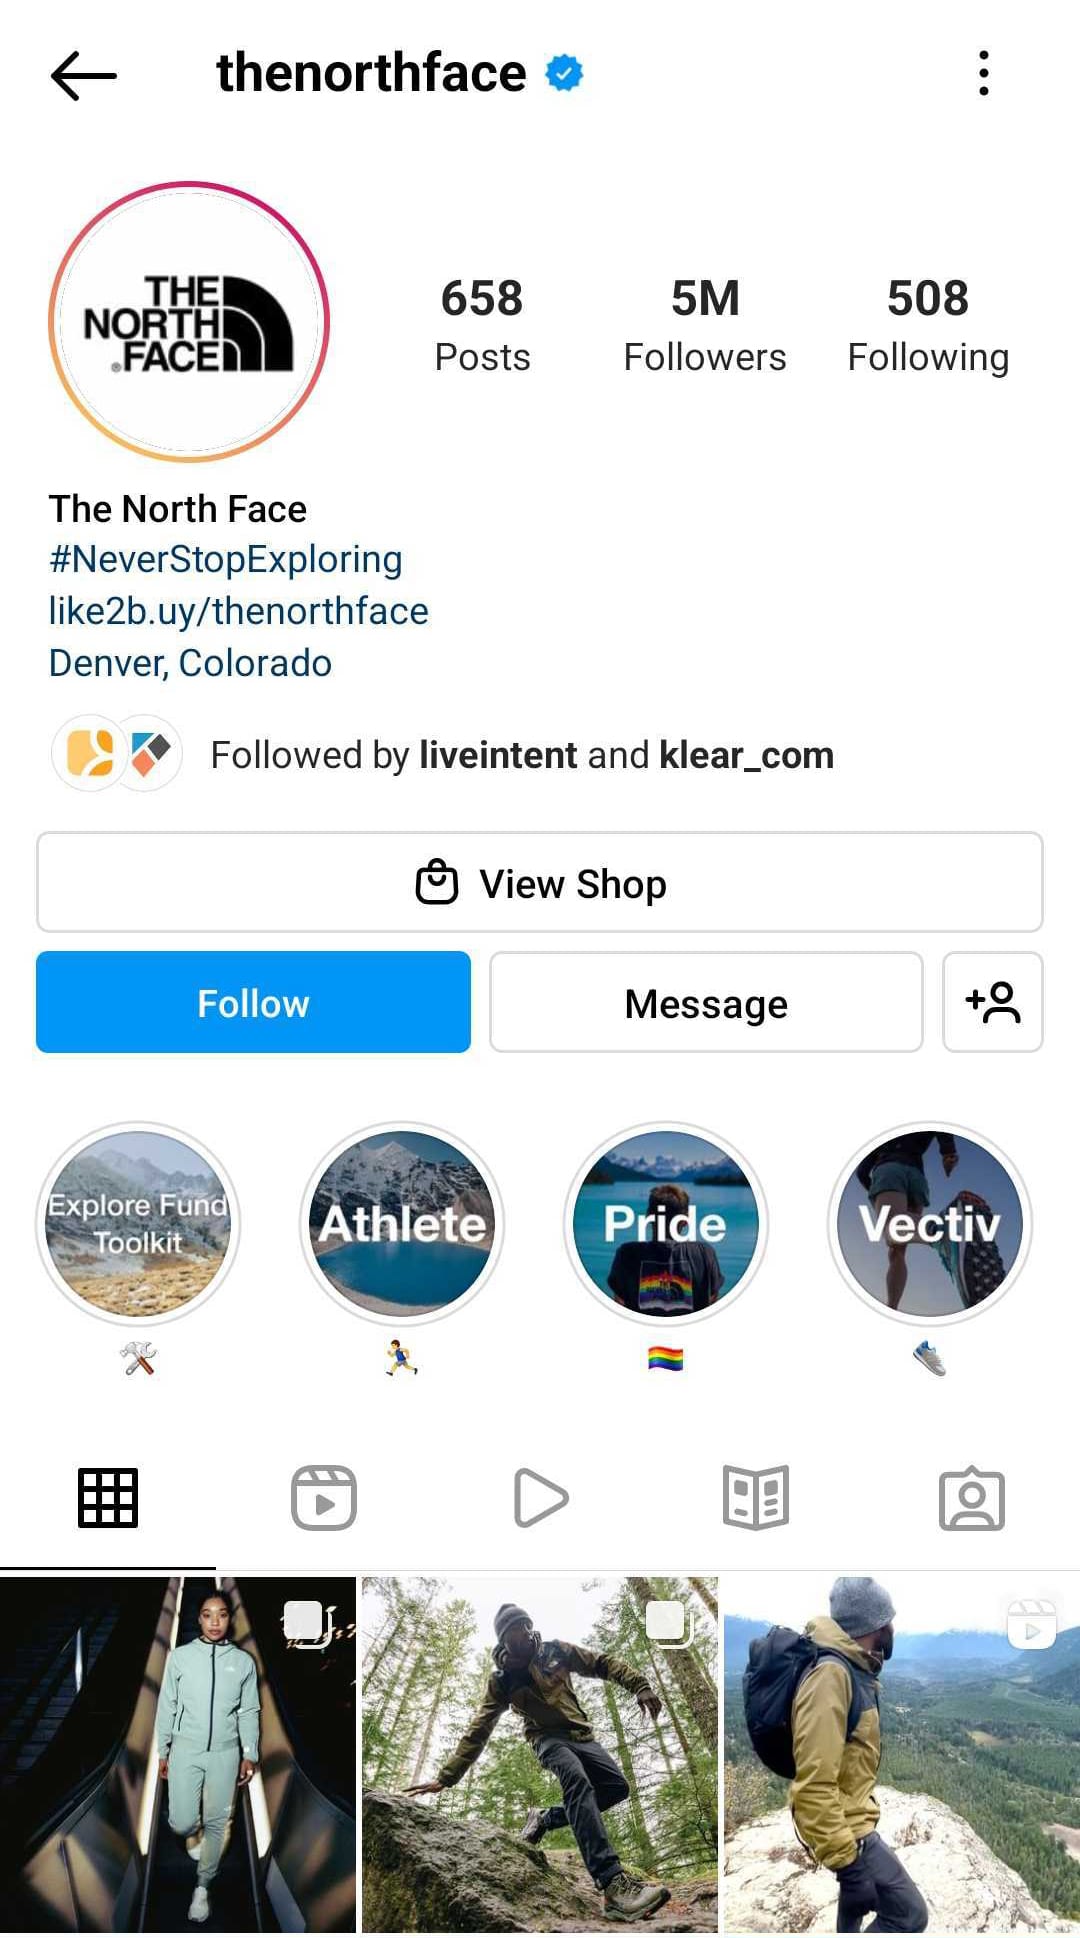 the north face social media landing page